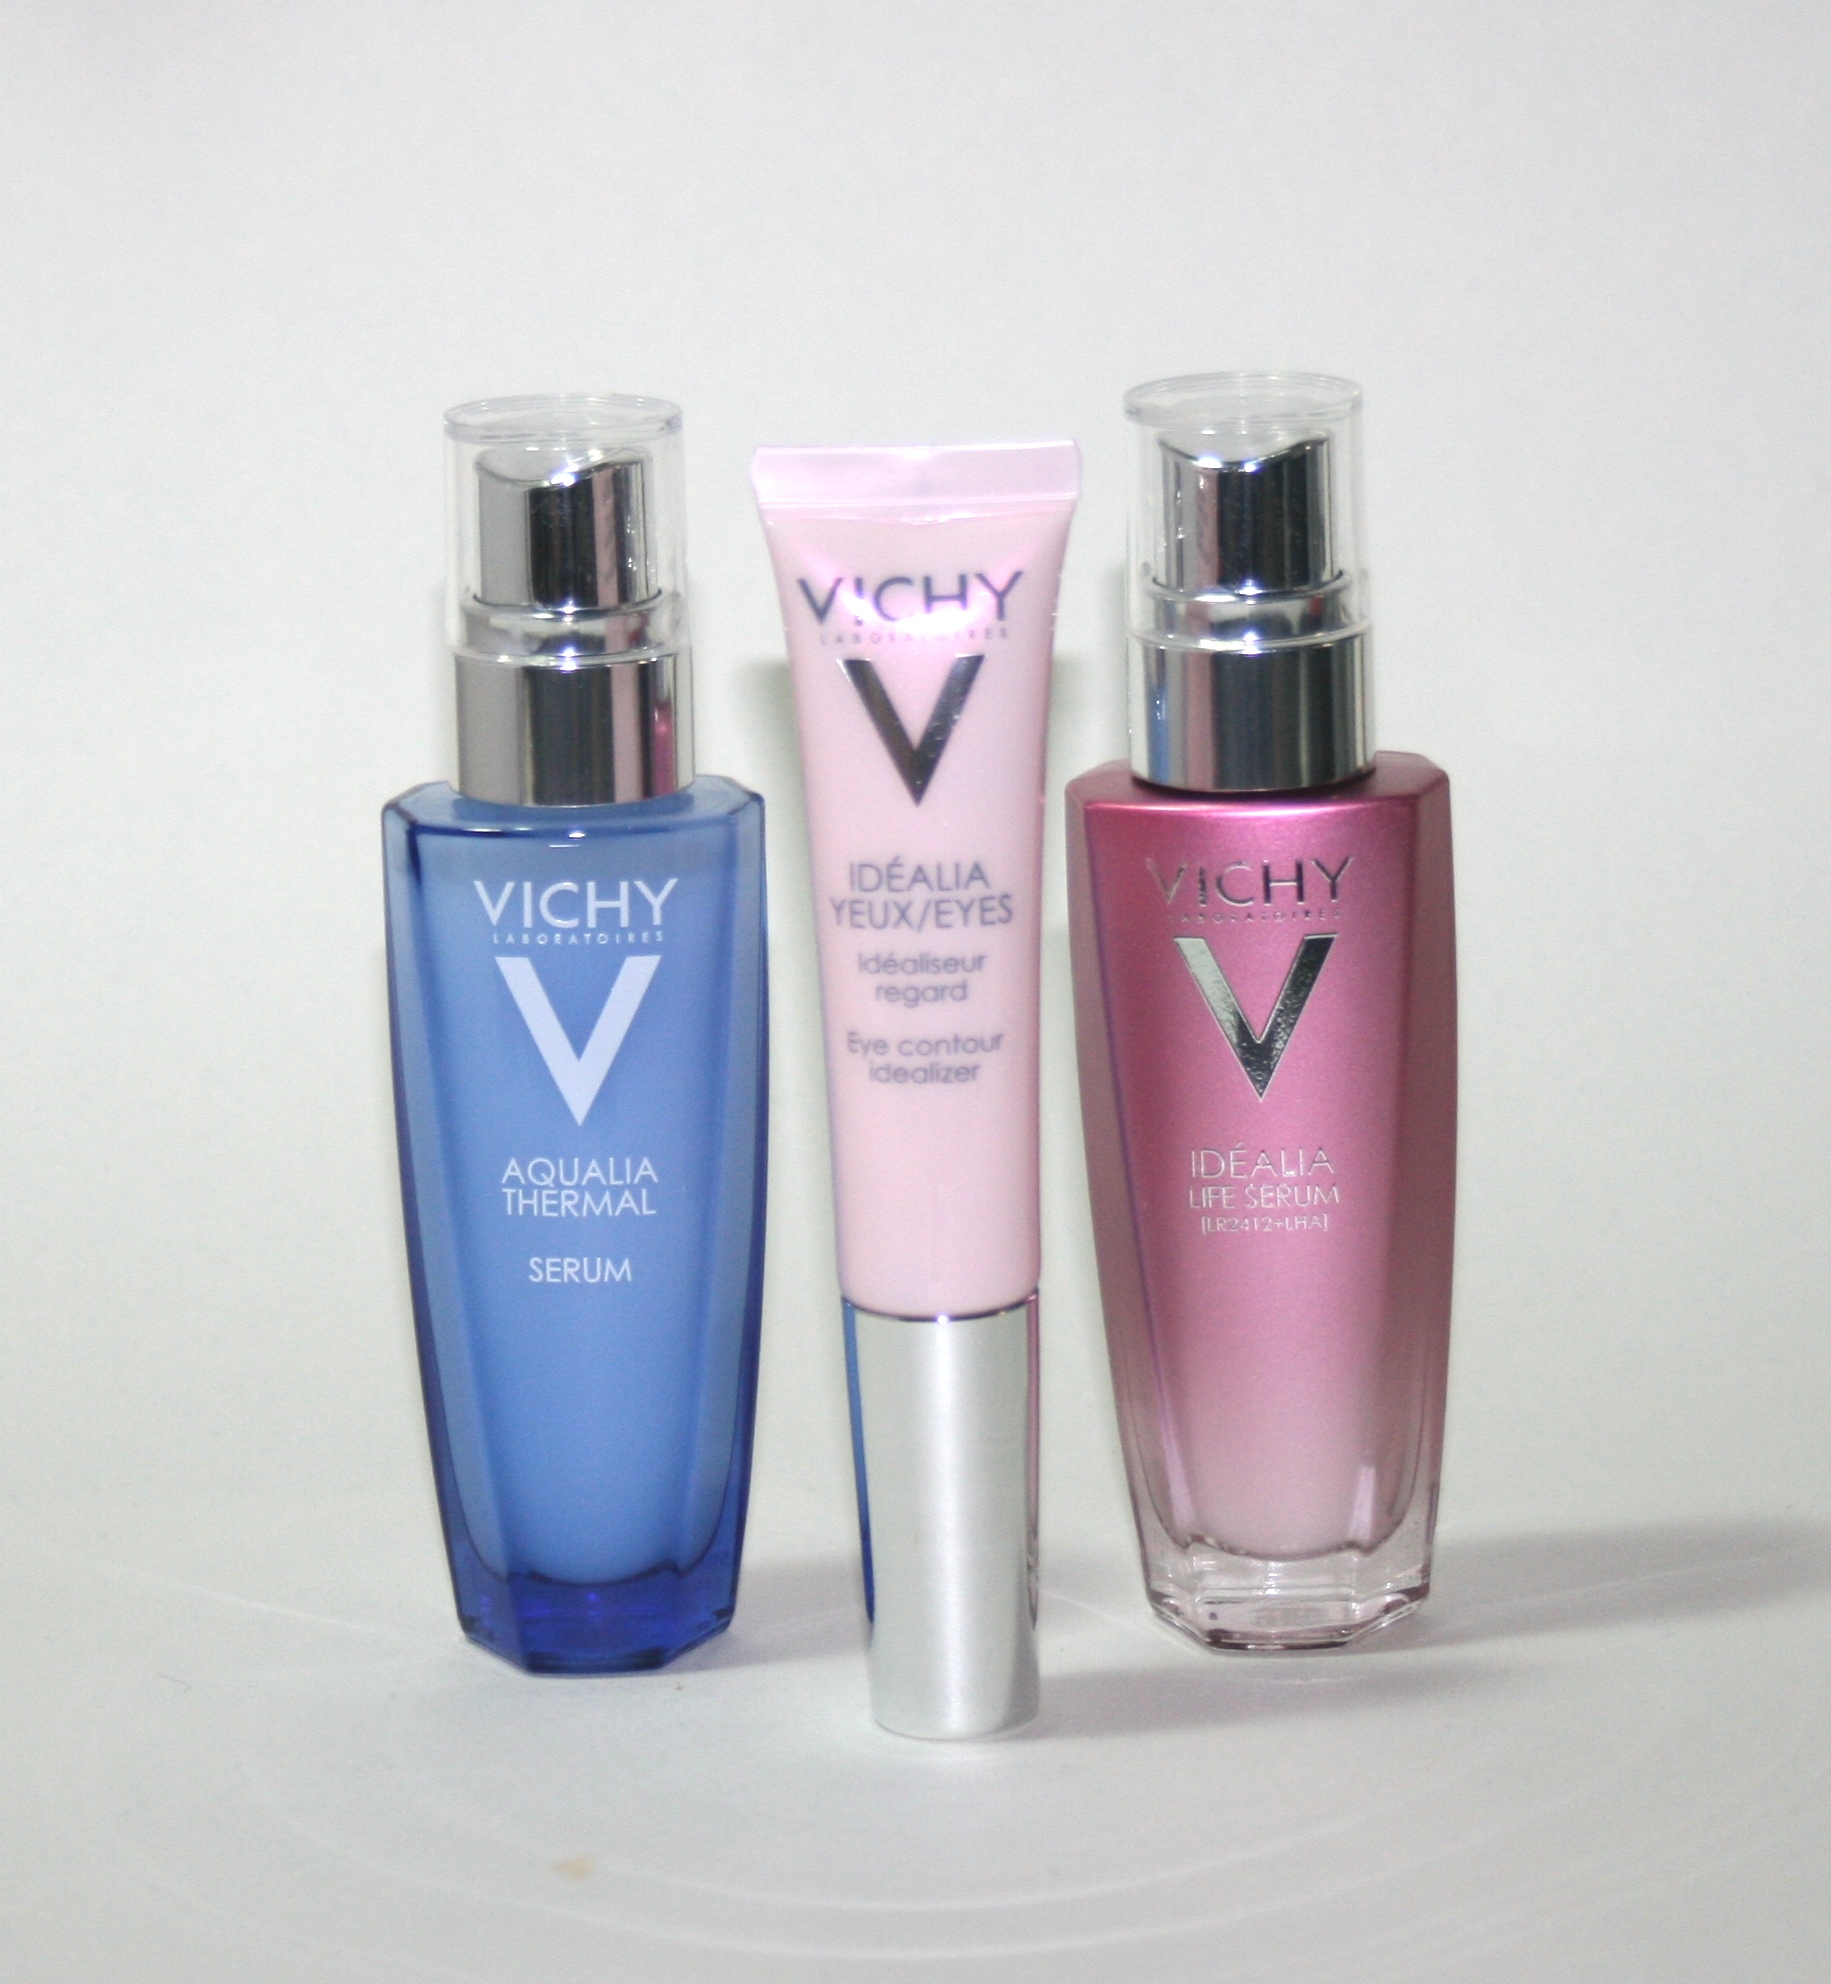 New from Vichy: Idealia and Aqualia Thermal Serum